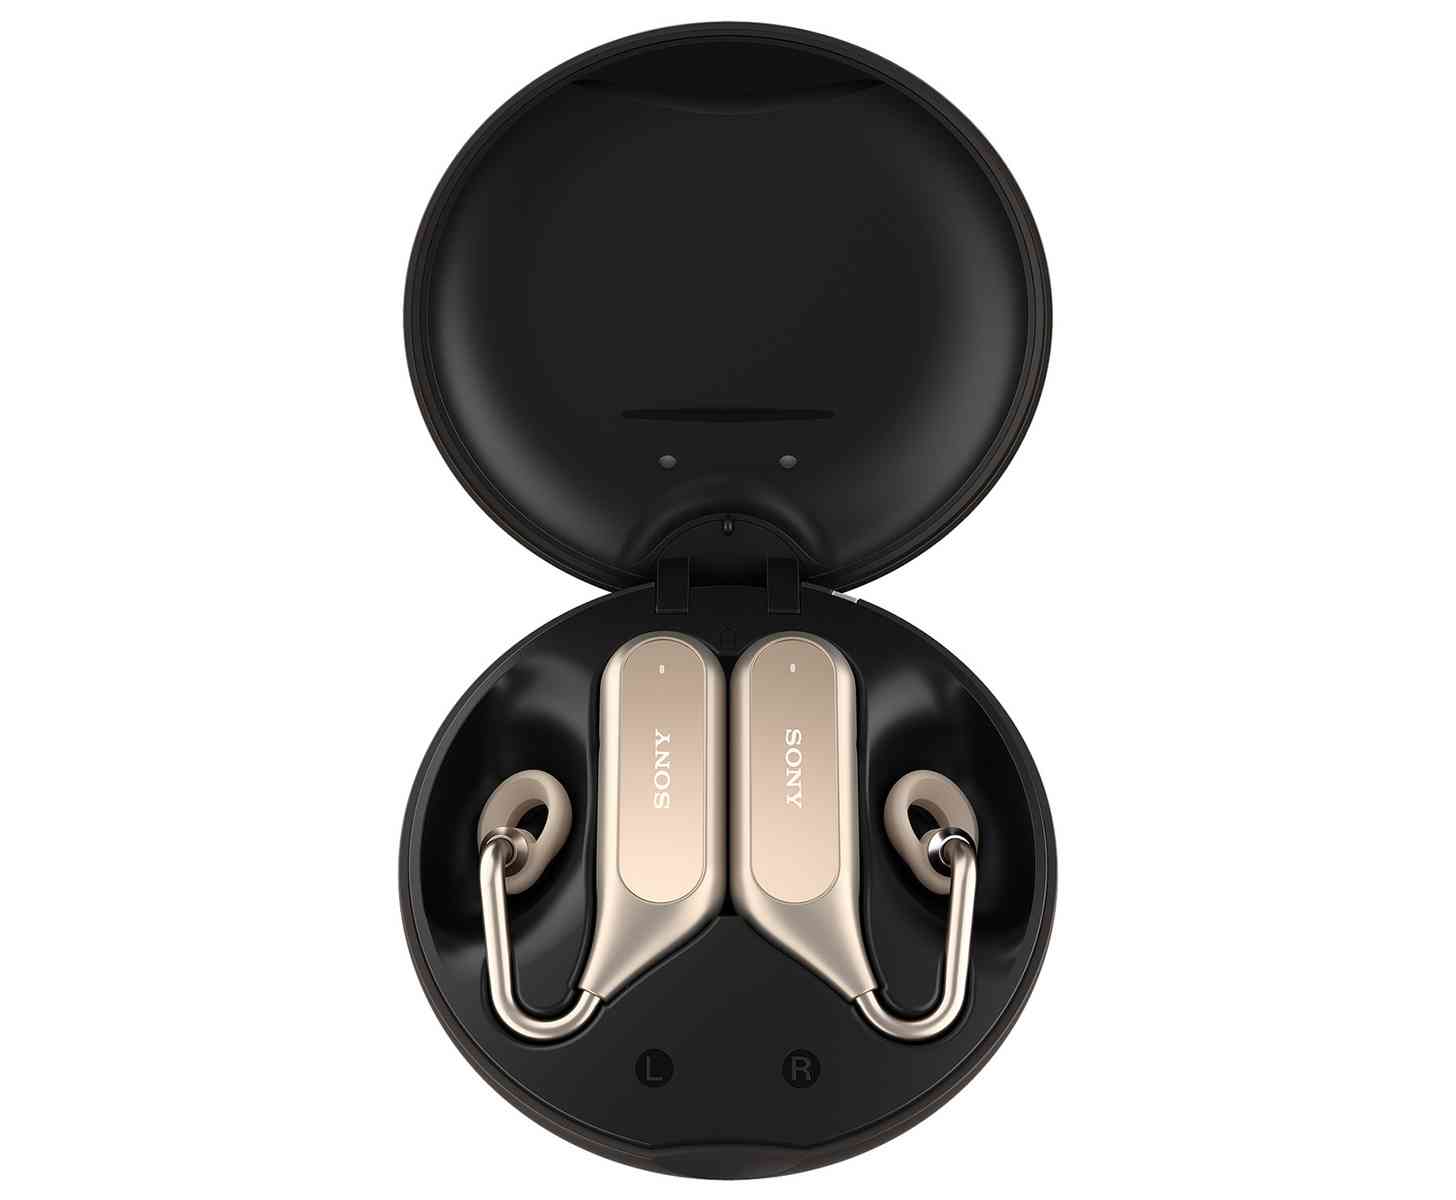 Sony Xperia Ear Duo carrying case